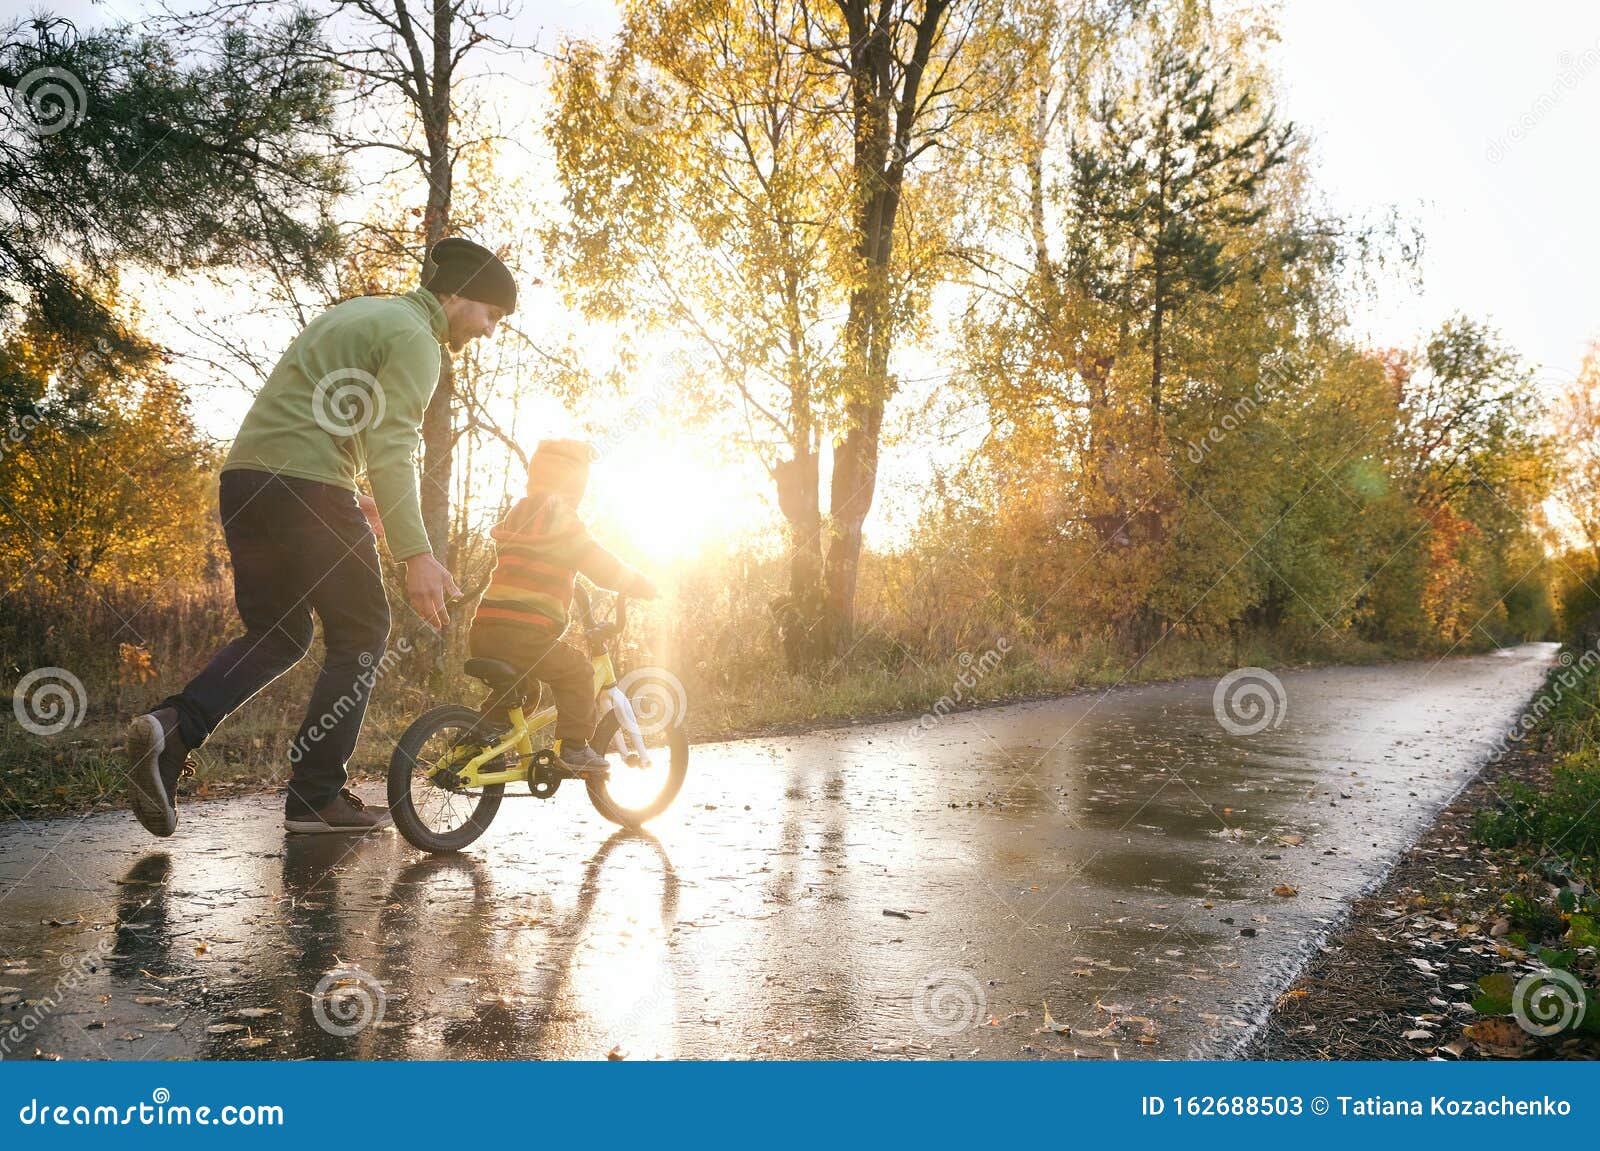 father teaches his little child to ride bike in autumn park. happy family moments. time together dad and son. candid lifestyle